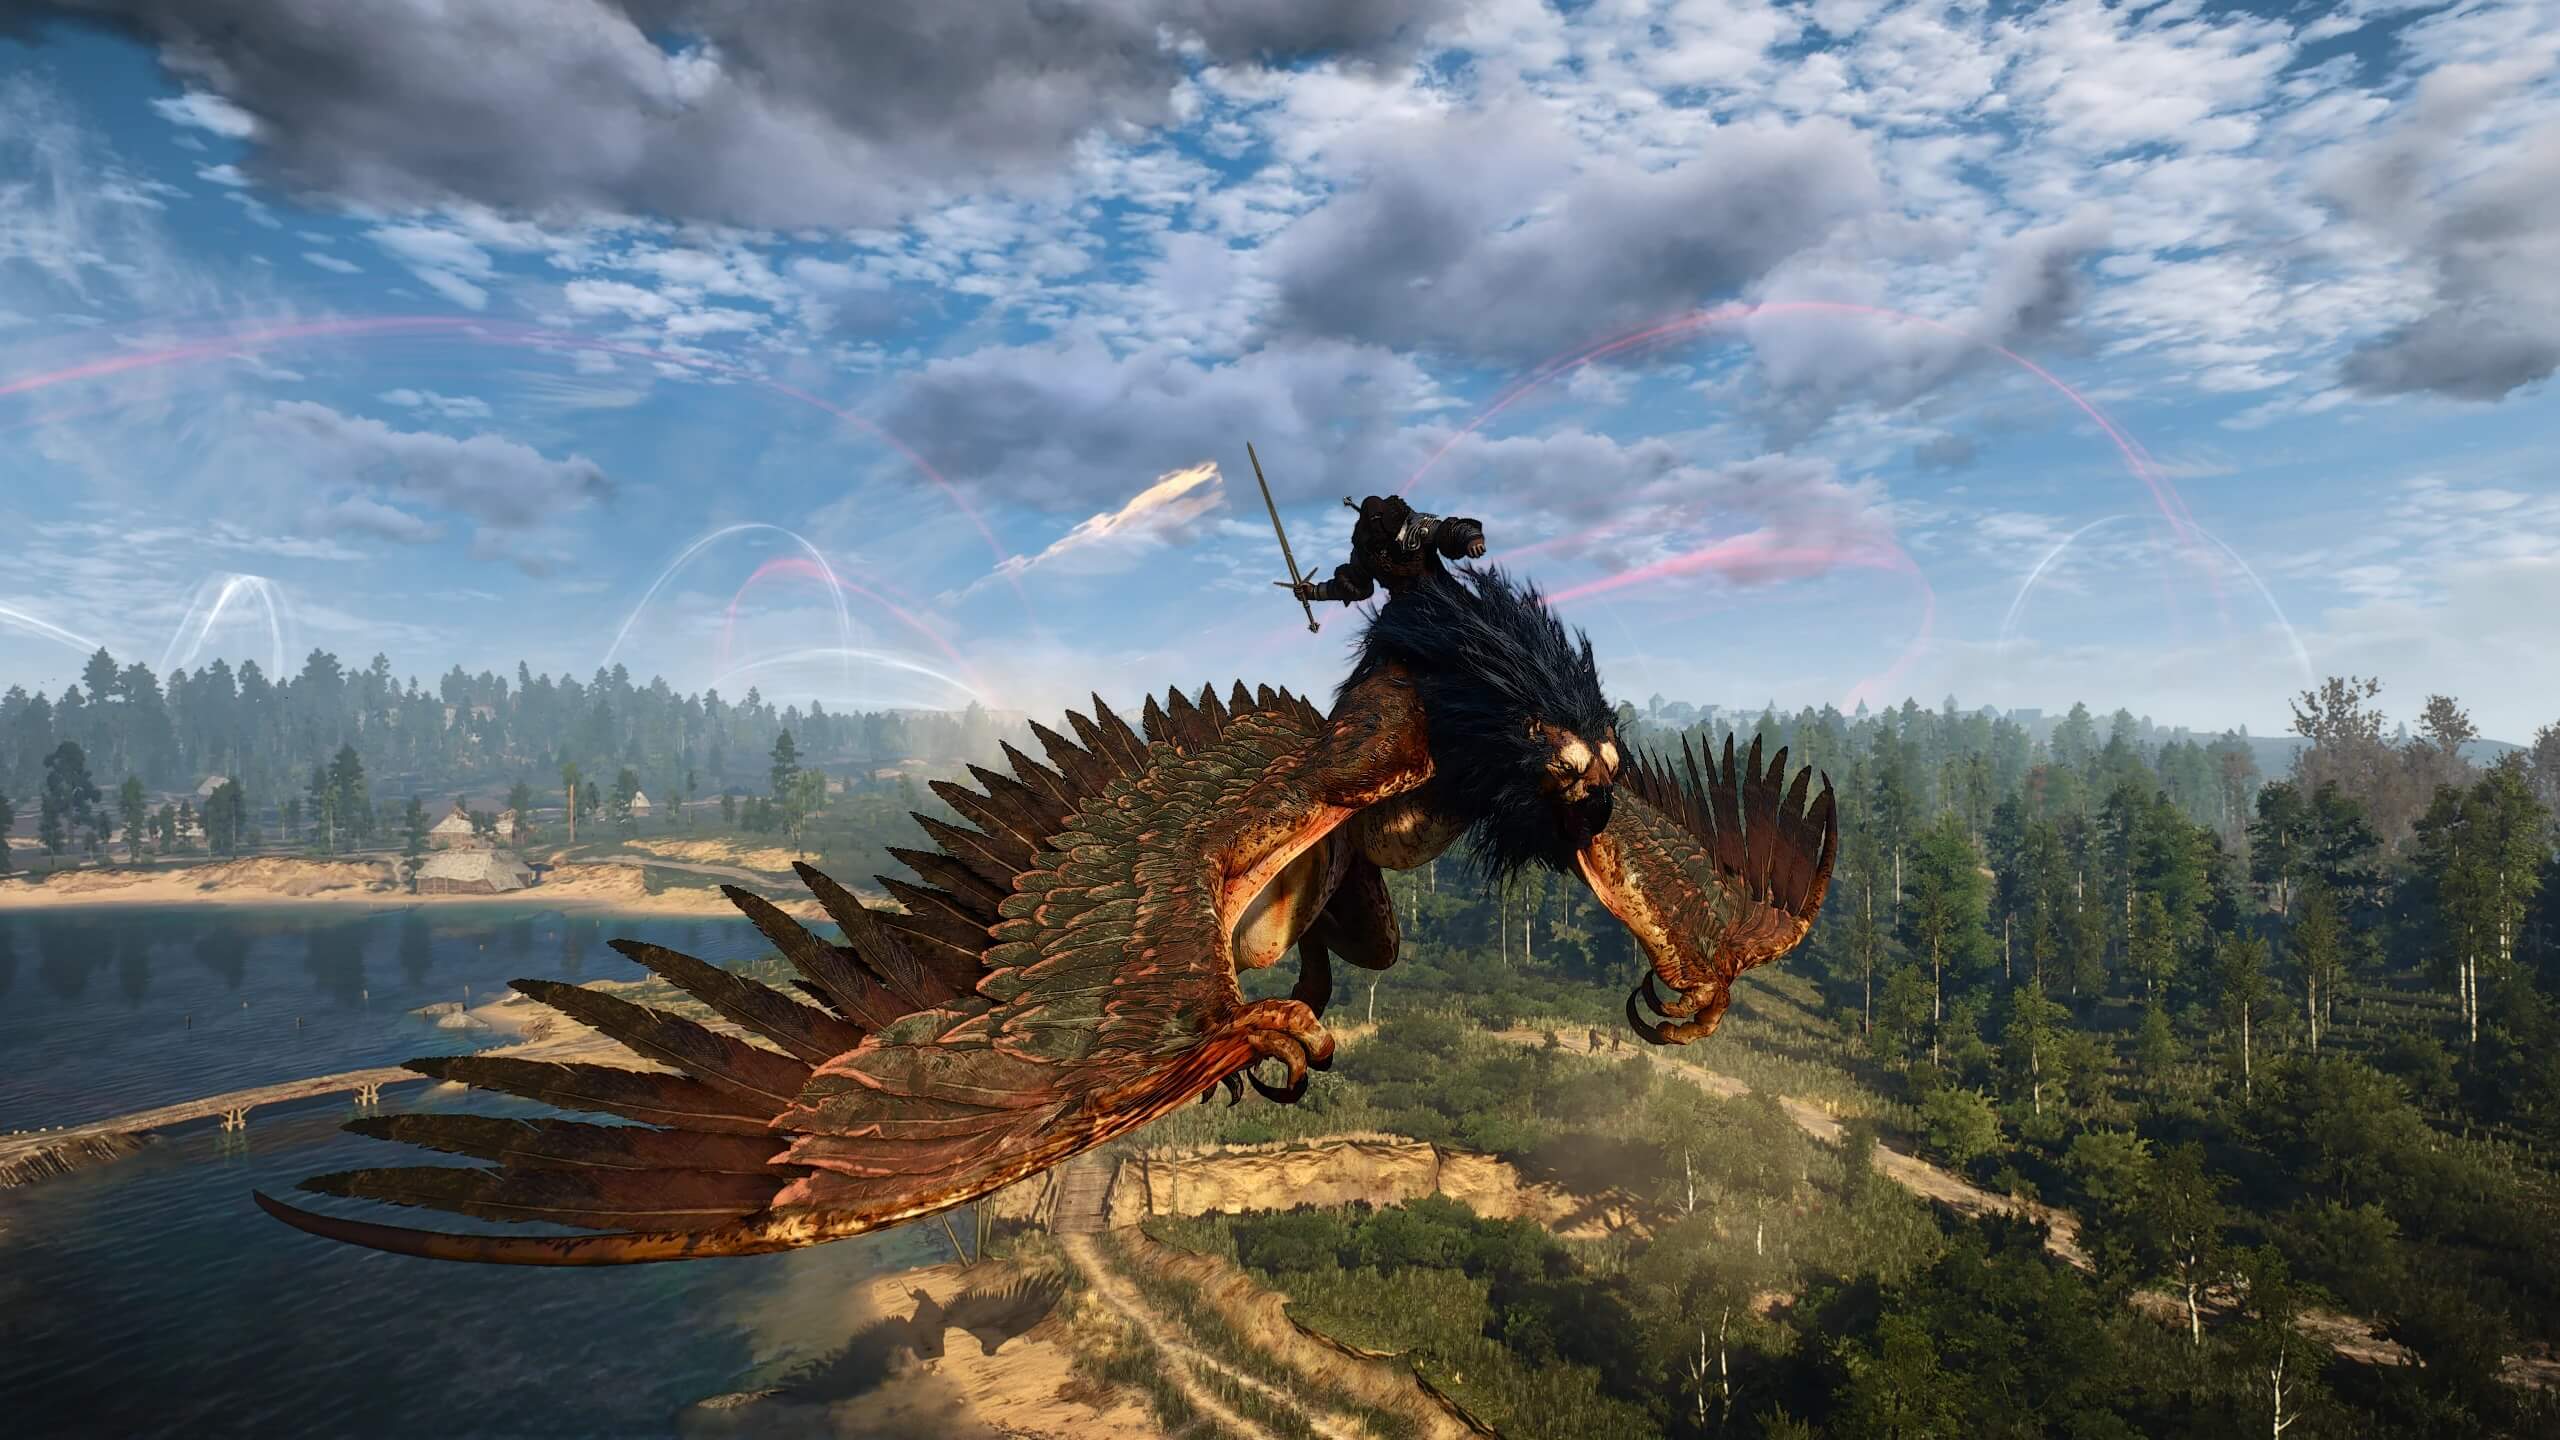 The Witcher 3 just got a new mod that allows you to ride a Griffin